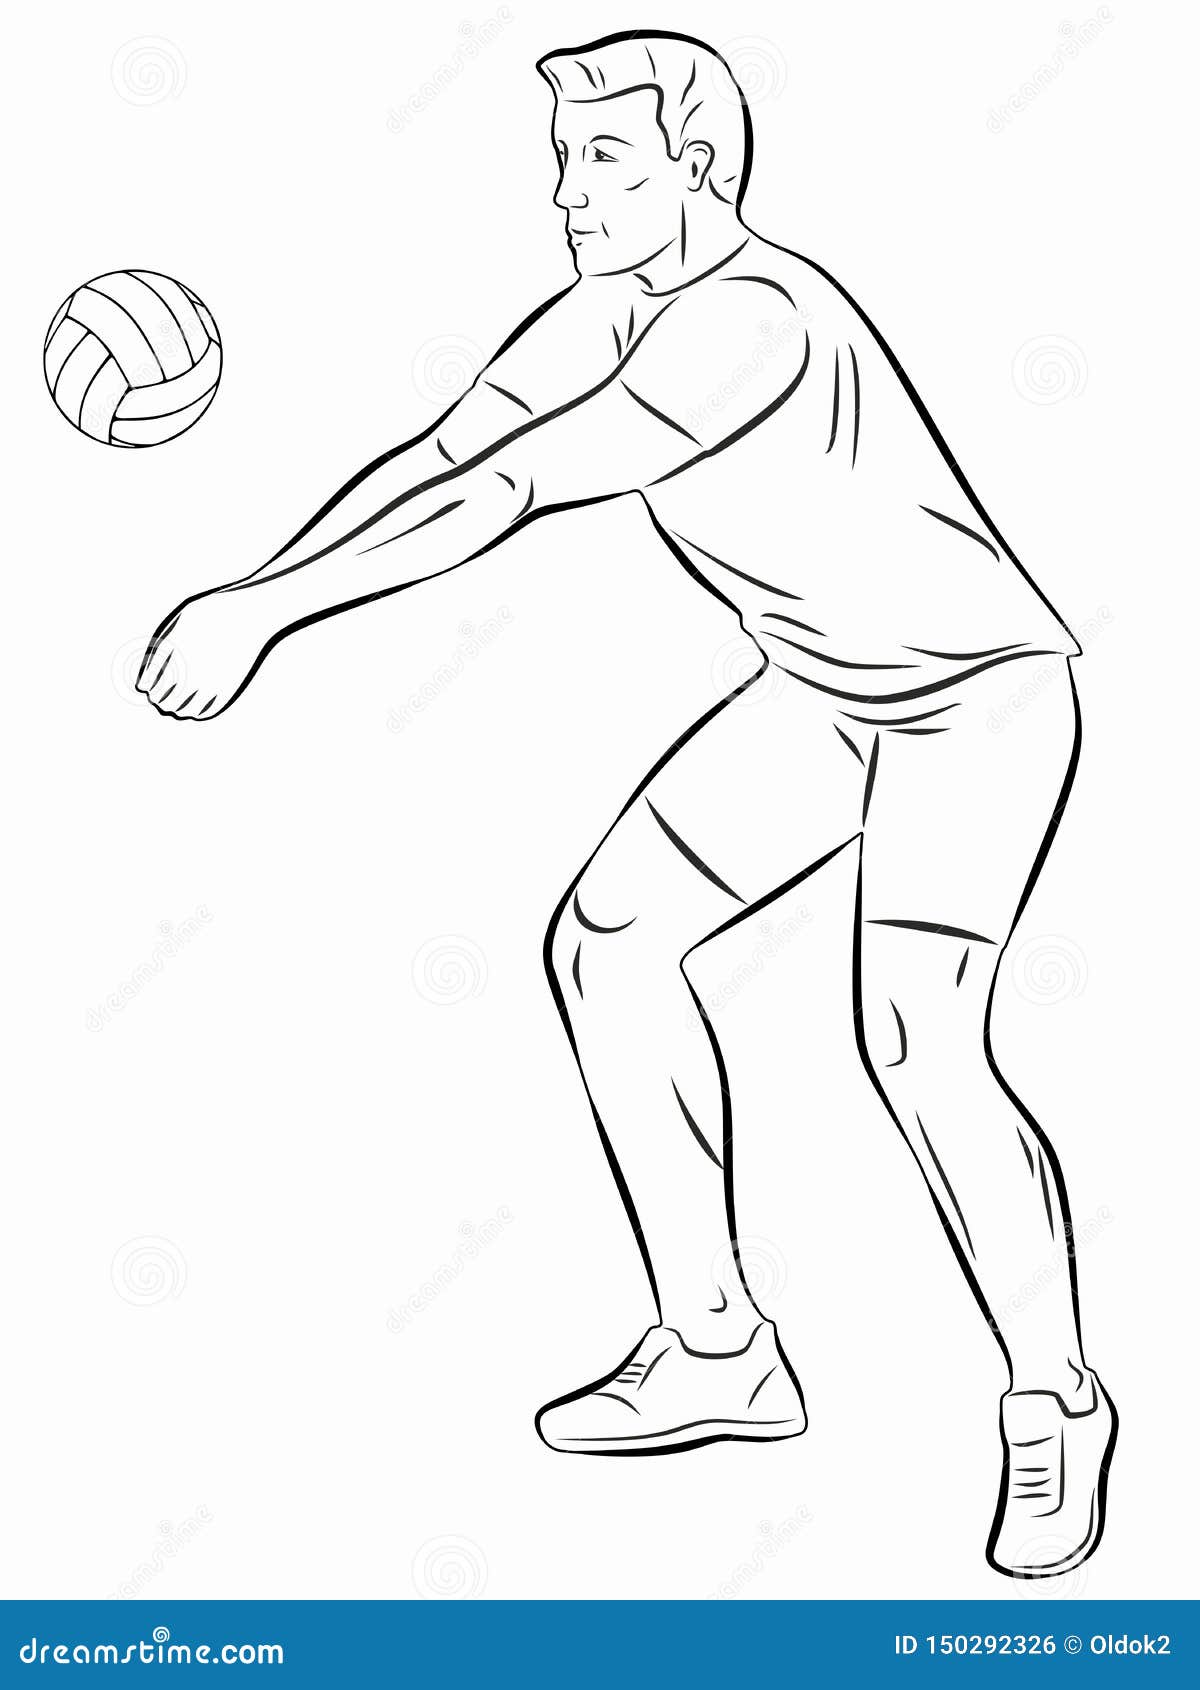 Isolated Illustration Volleyball Player Black White Drawing White Background Illustration Volleyball Player Vector 150292326 